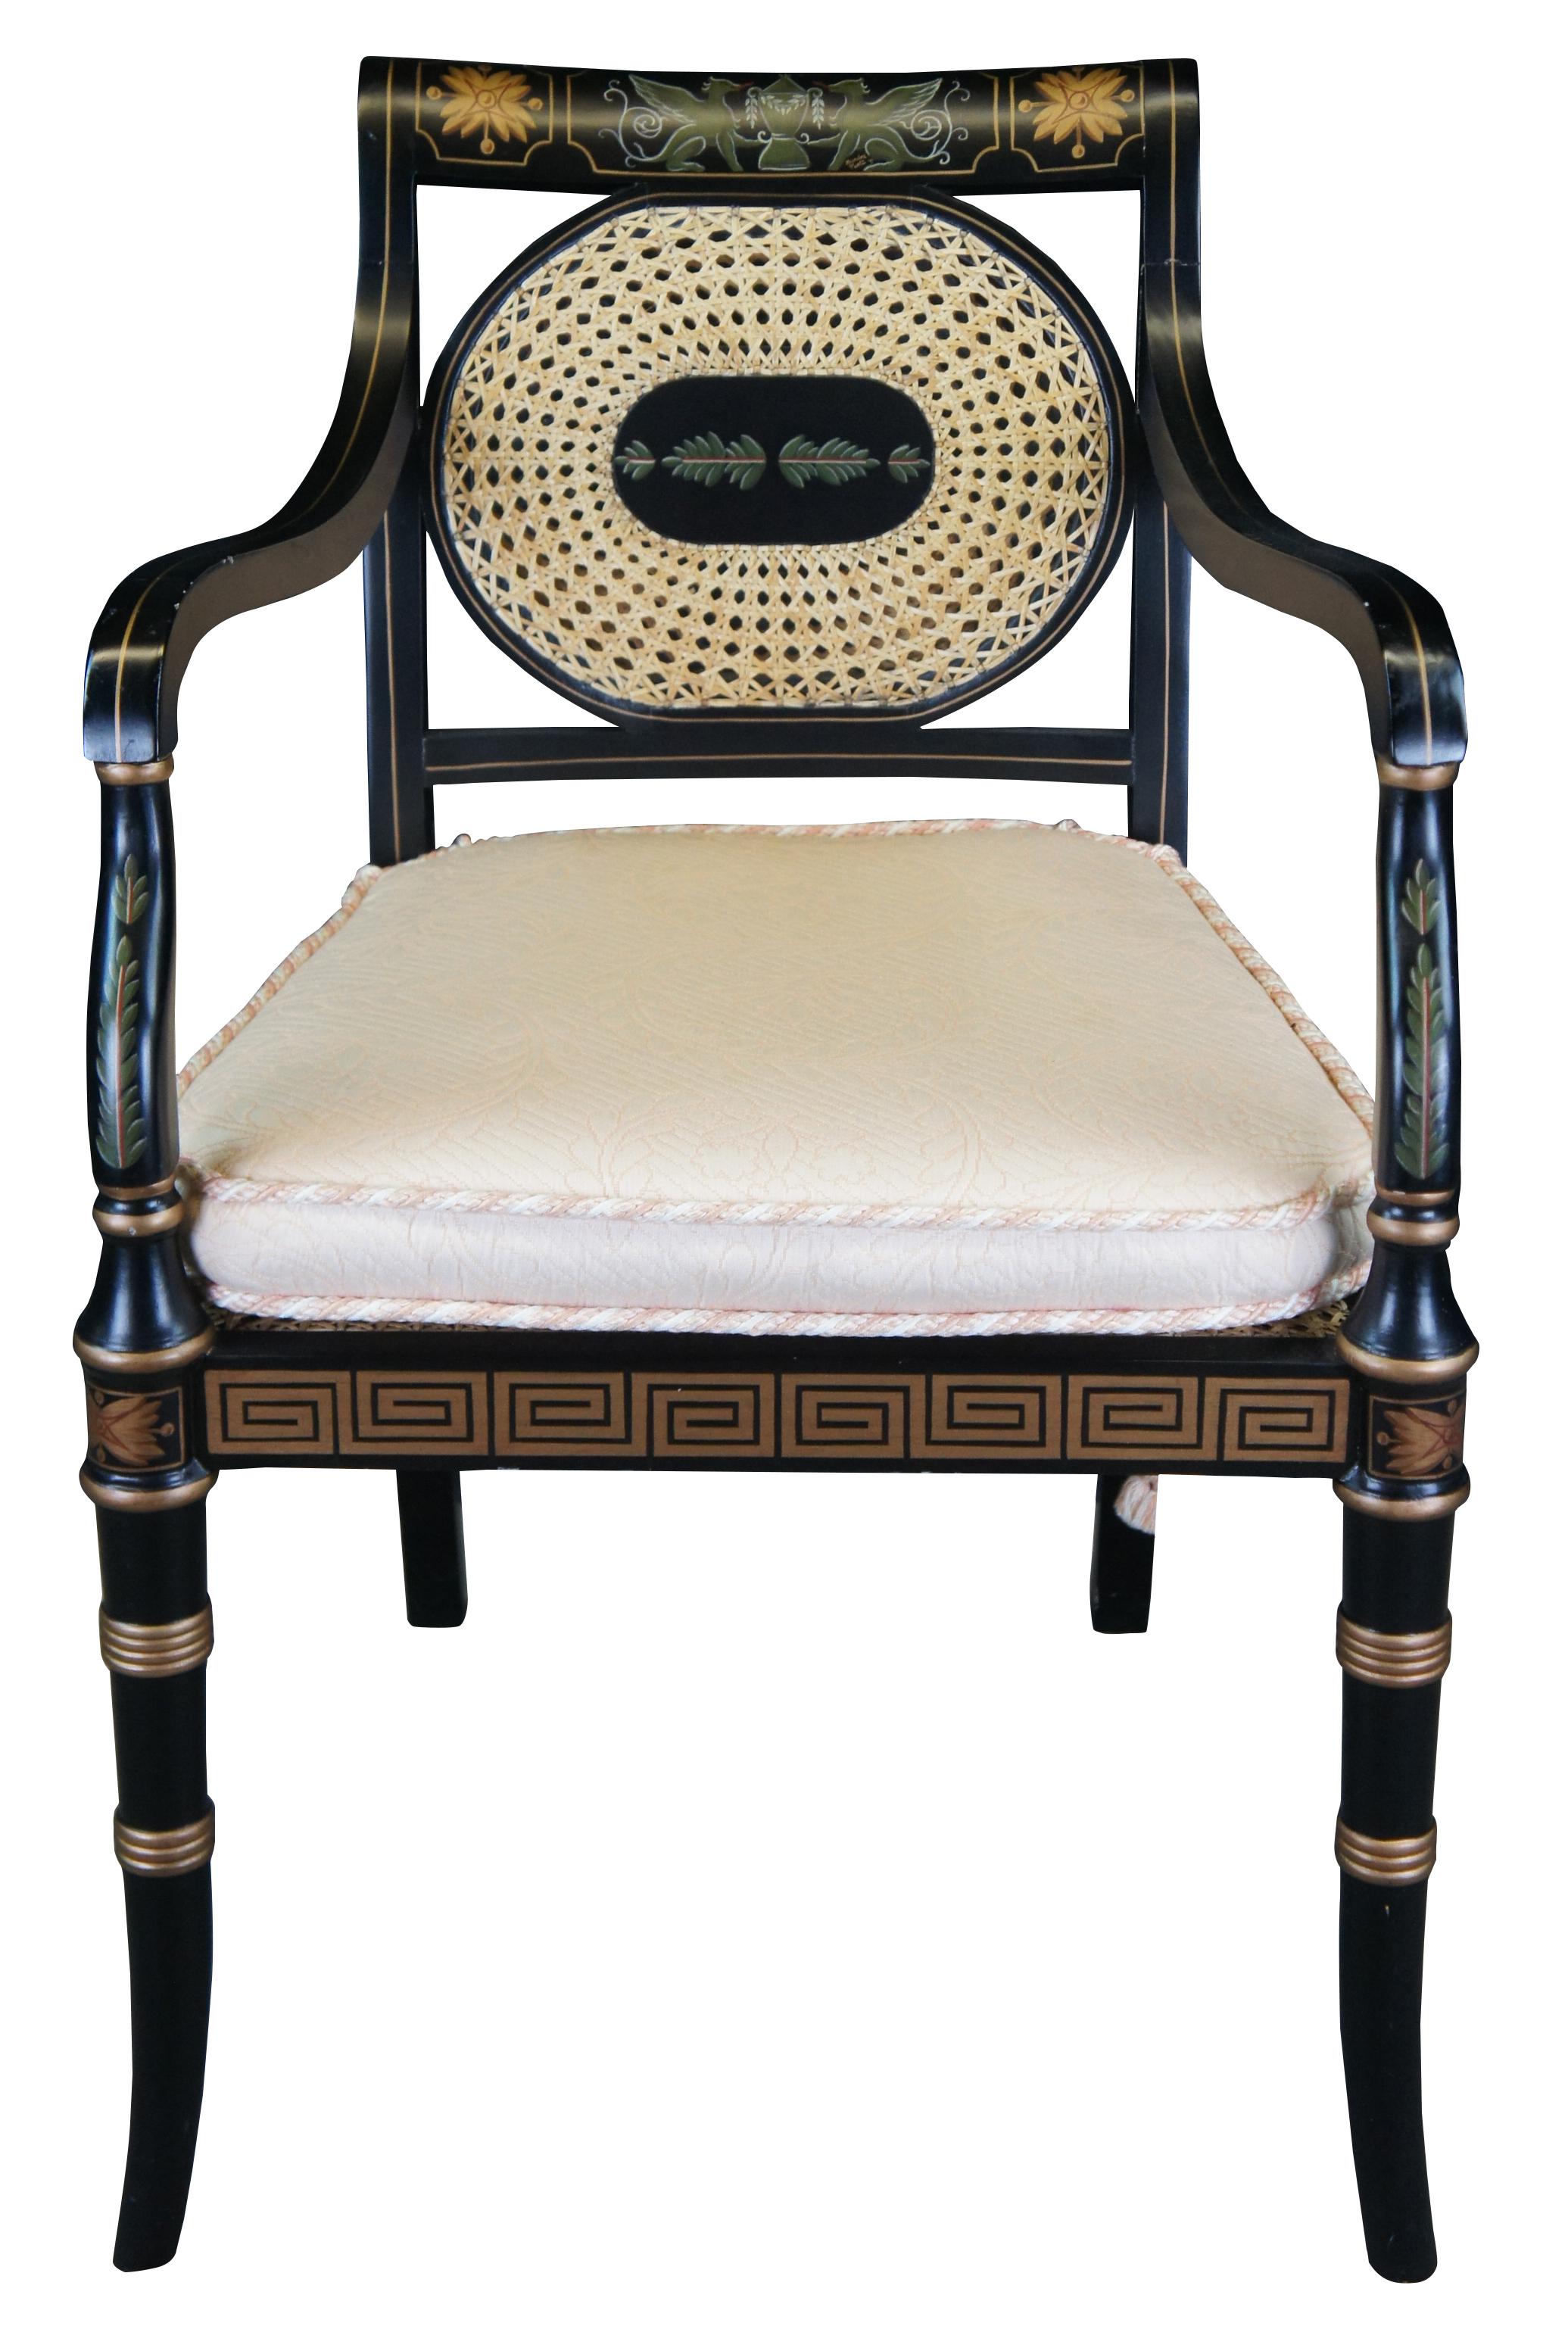 English Regency style black lacquer arm chair with cane seat and back. Features golden ribbed trim, a Greek key apron, stringing, leaf paintings and a pair of griffins holding an urn along the top. Features a removable slip seat with braided cording